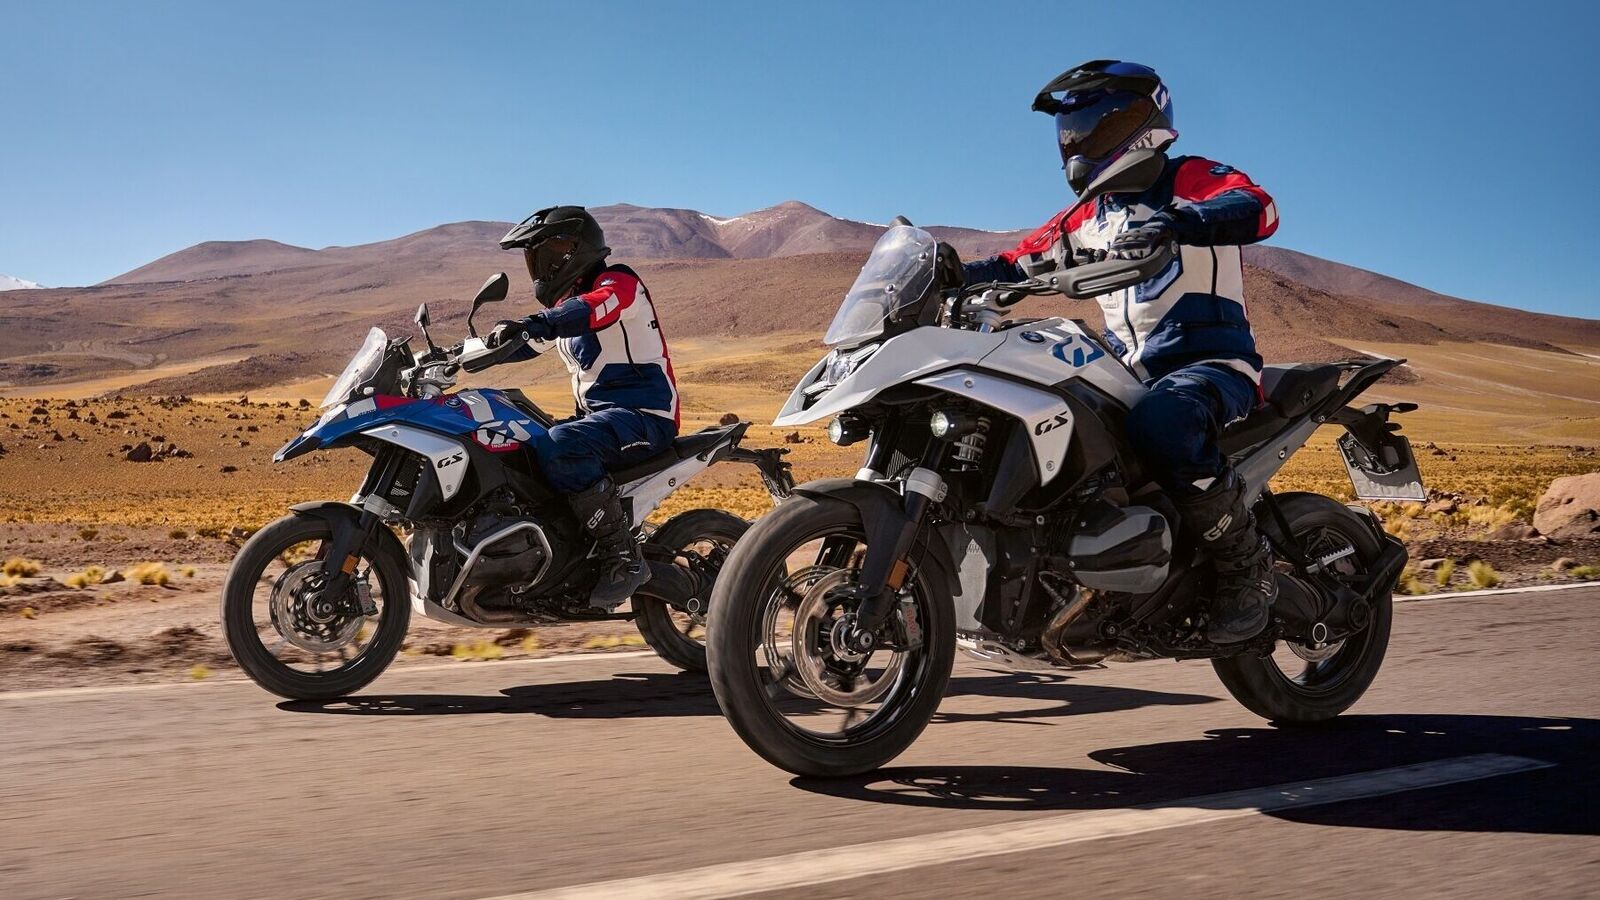 BMW R 1300 GS bookings open at select dealerships, will launch soon